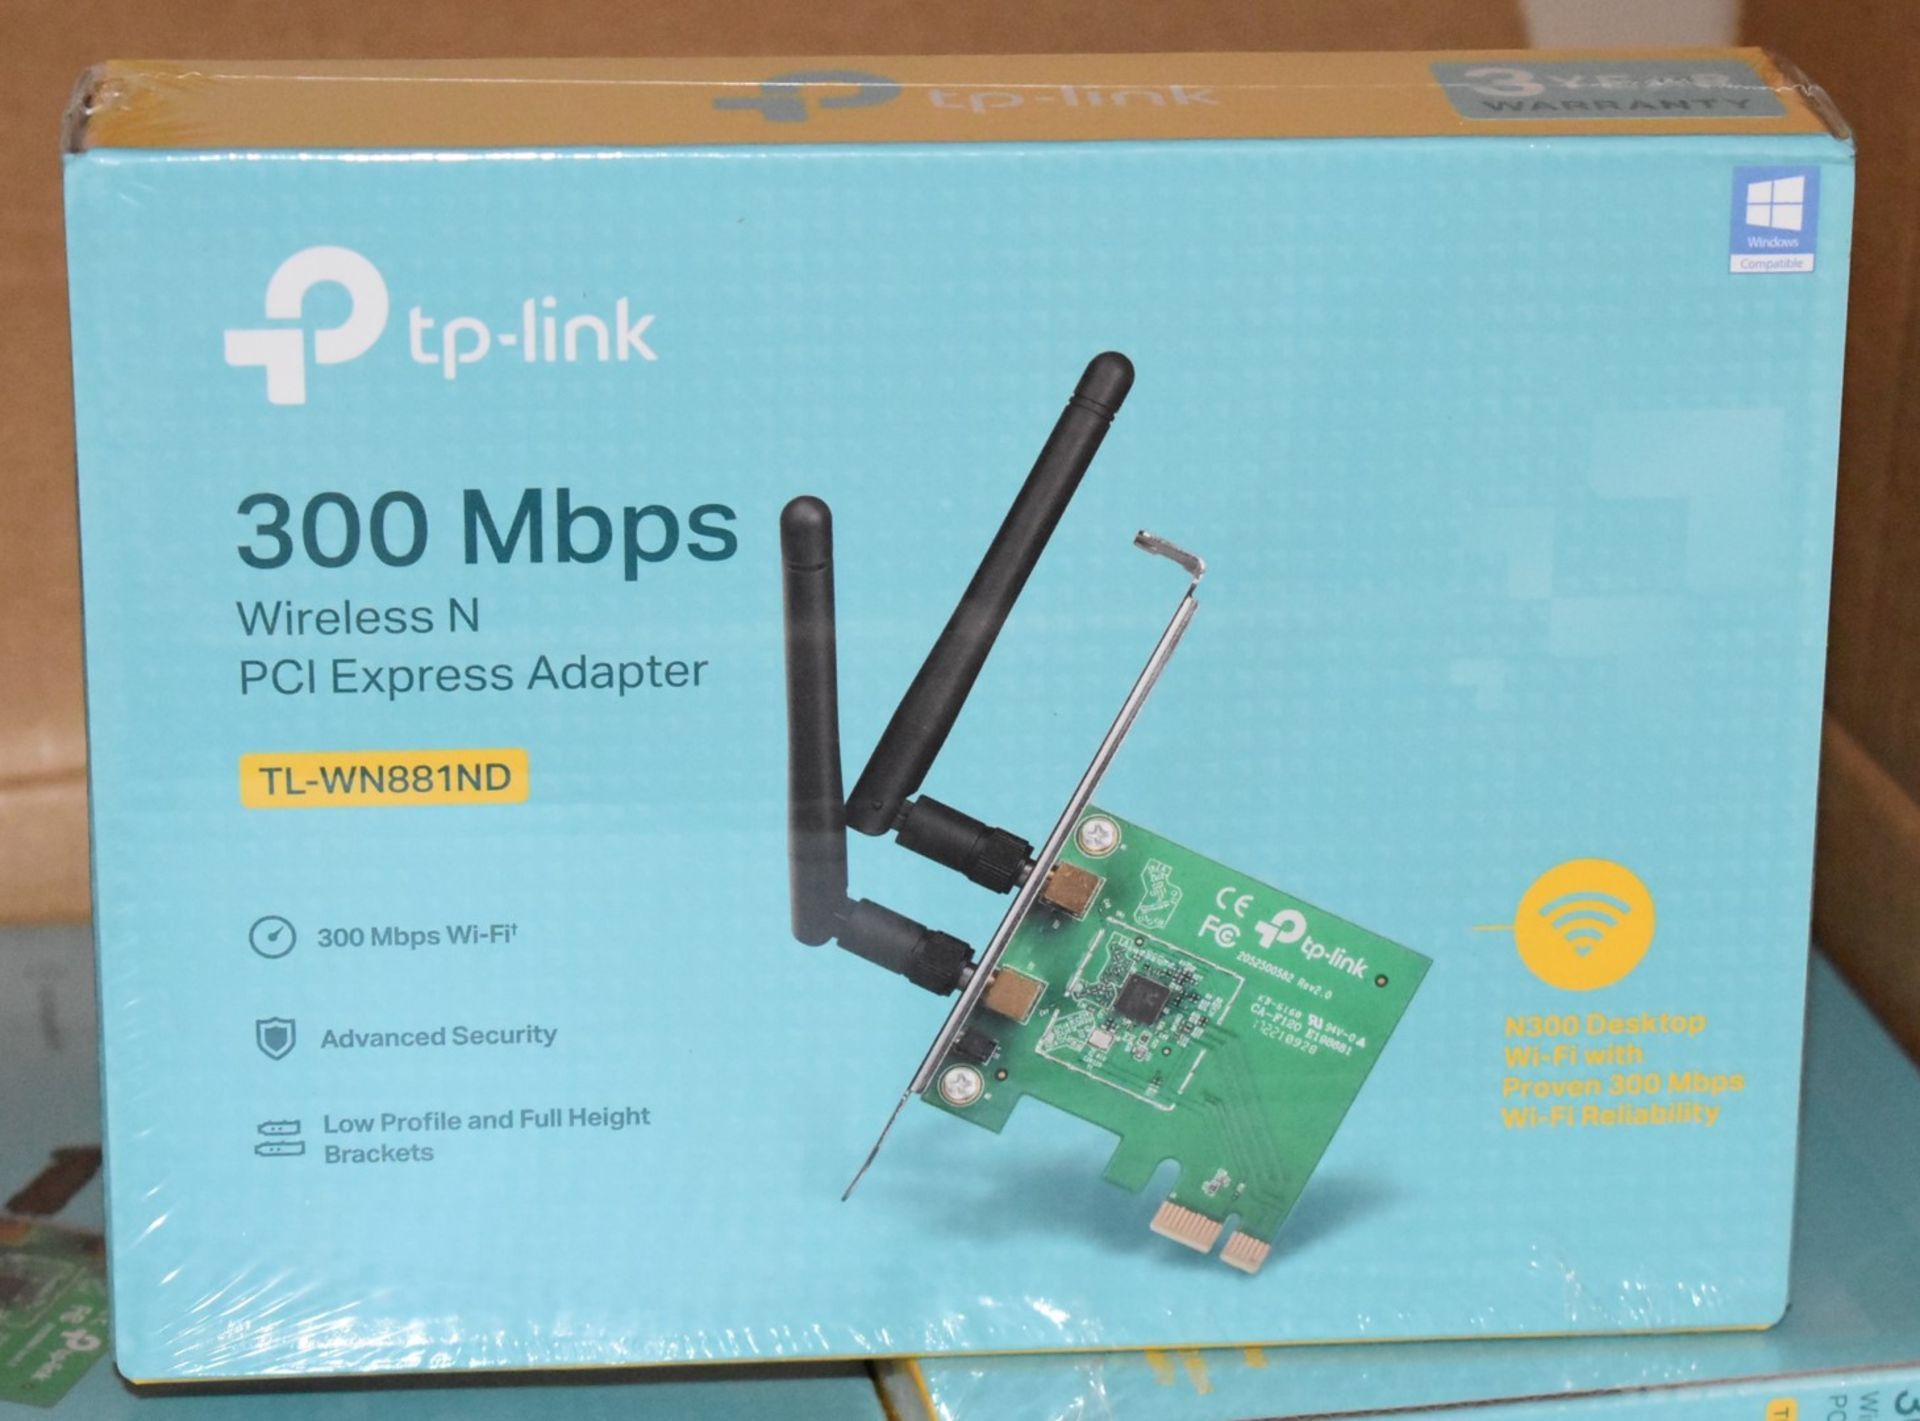 1 x TP Link 300Mbps Wireless N PCI Express Adapter - TL-WN881ND - New Sealed Stock - Image 2 of 4